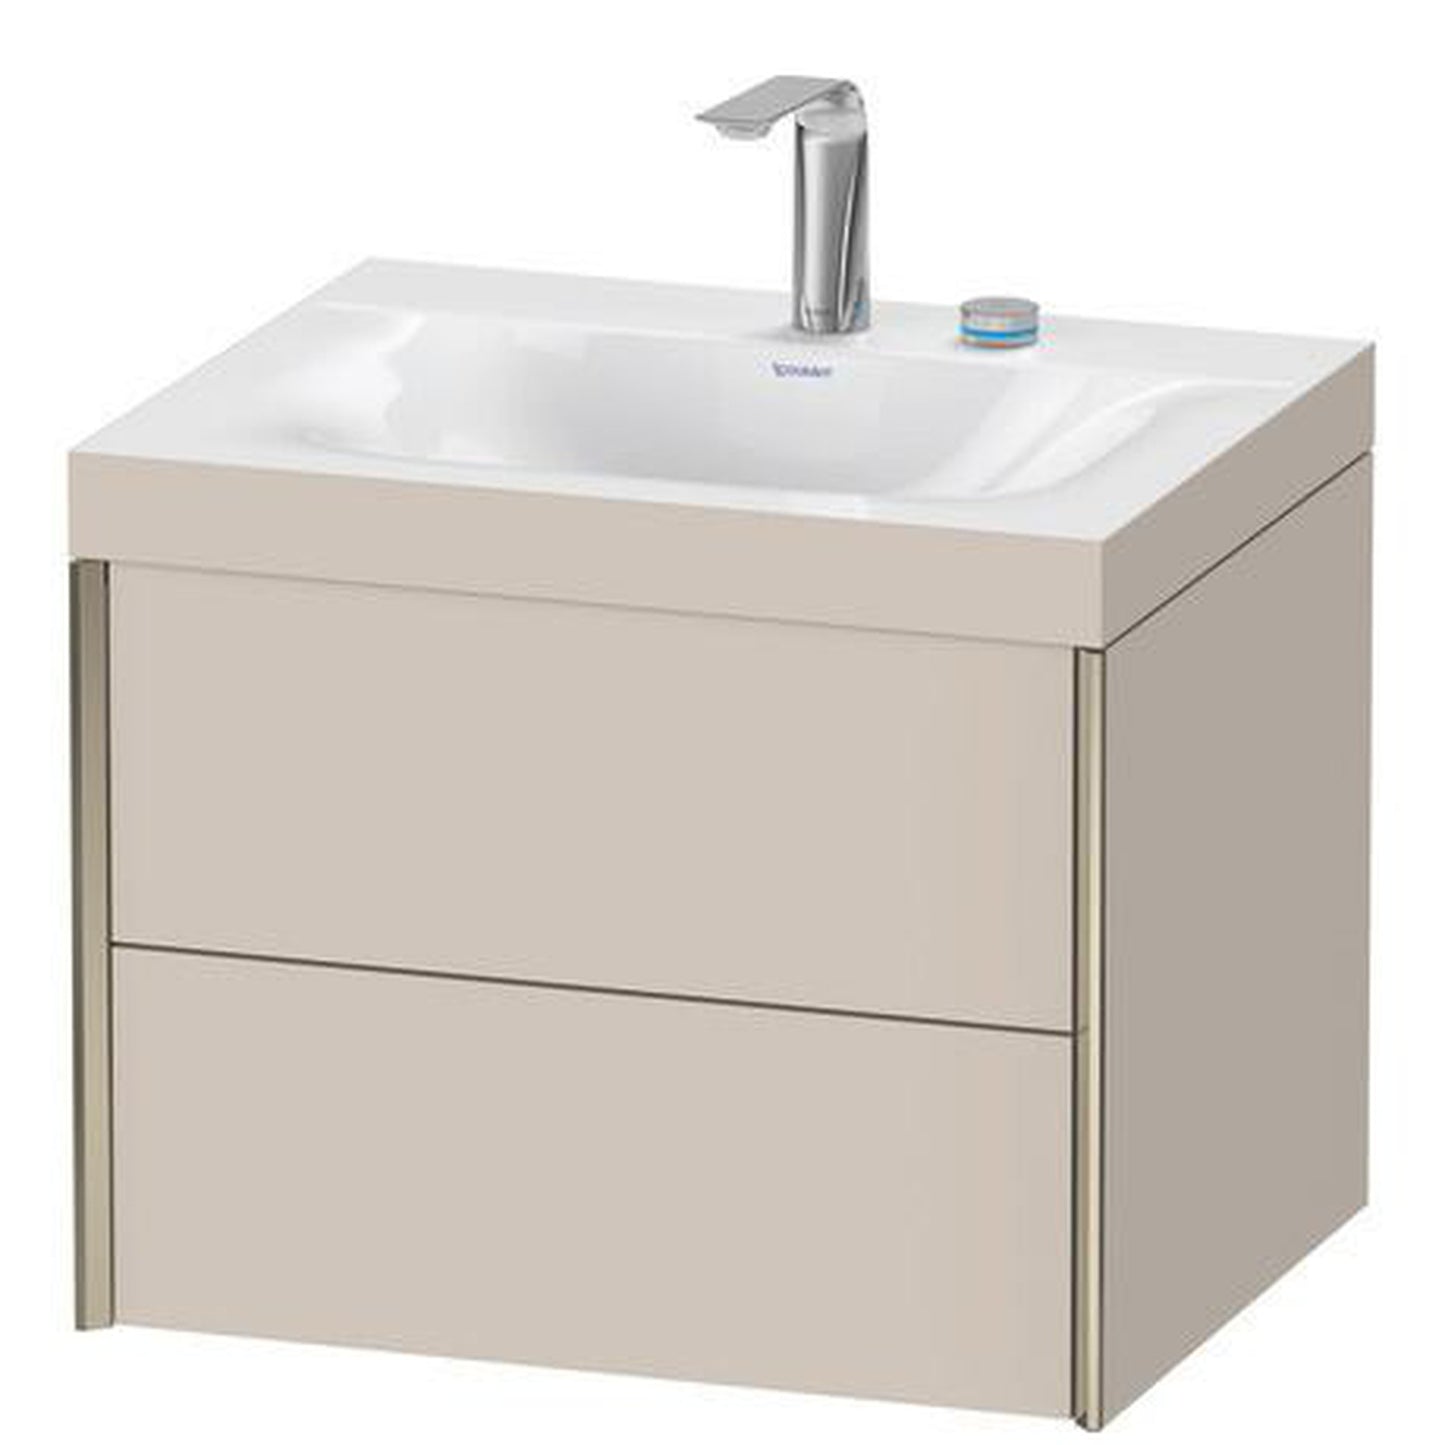 Duravit Xviu 24" x 20" x 19" Two Drawer C-Bonded Wall-Mount Vanity Kit With Two Tap Holes, Taupe (XV4614EB191C)